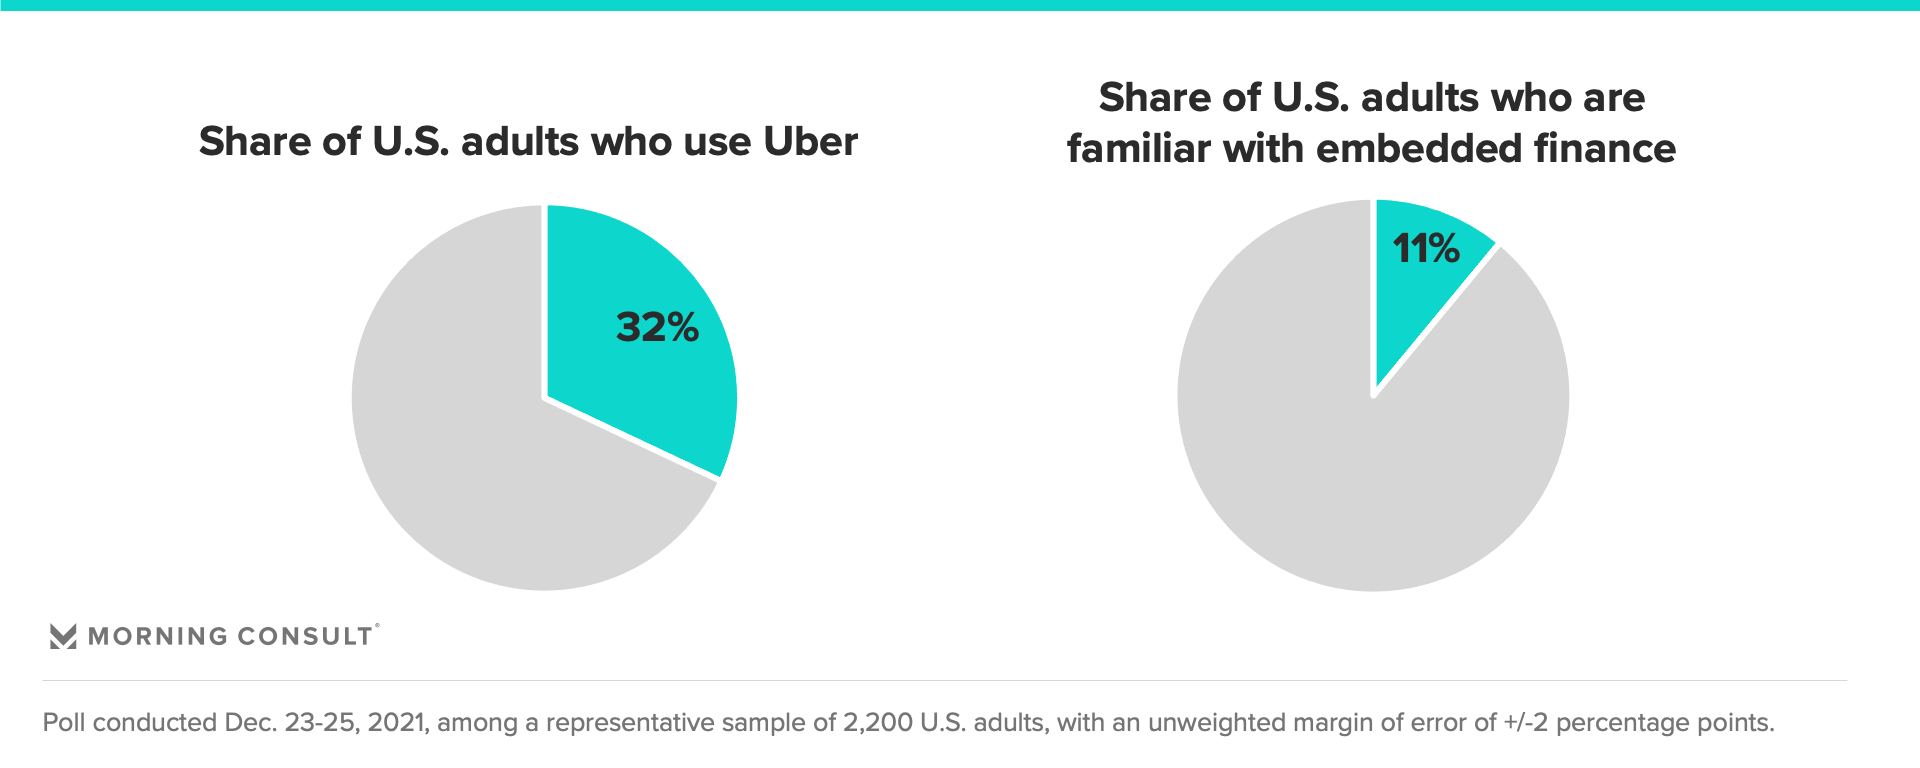 U.S. users experience with embedded finance